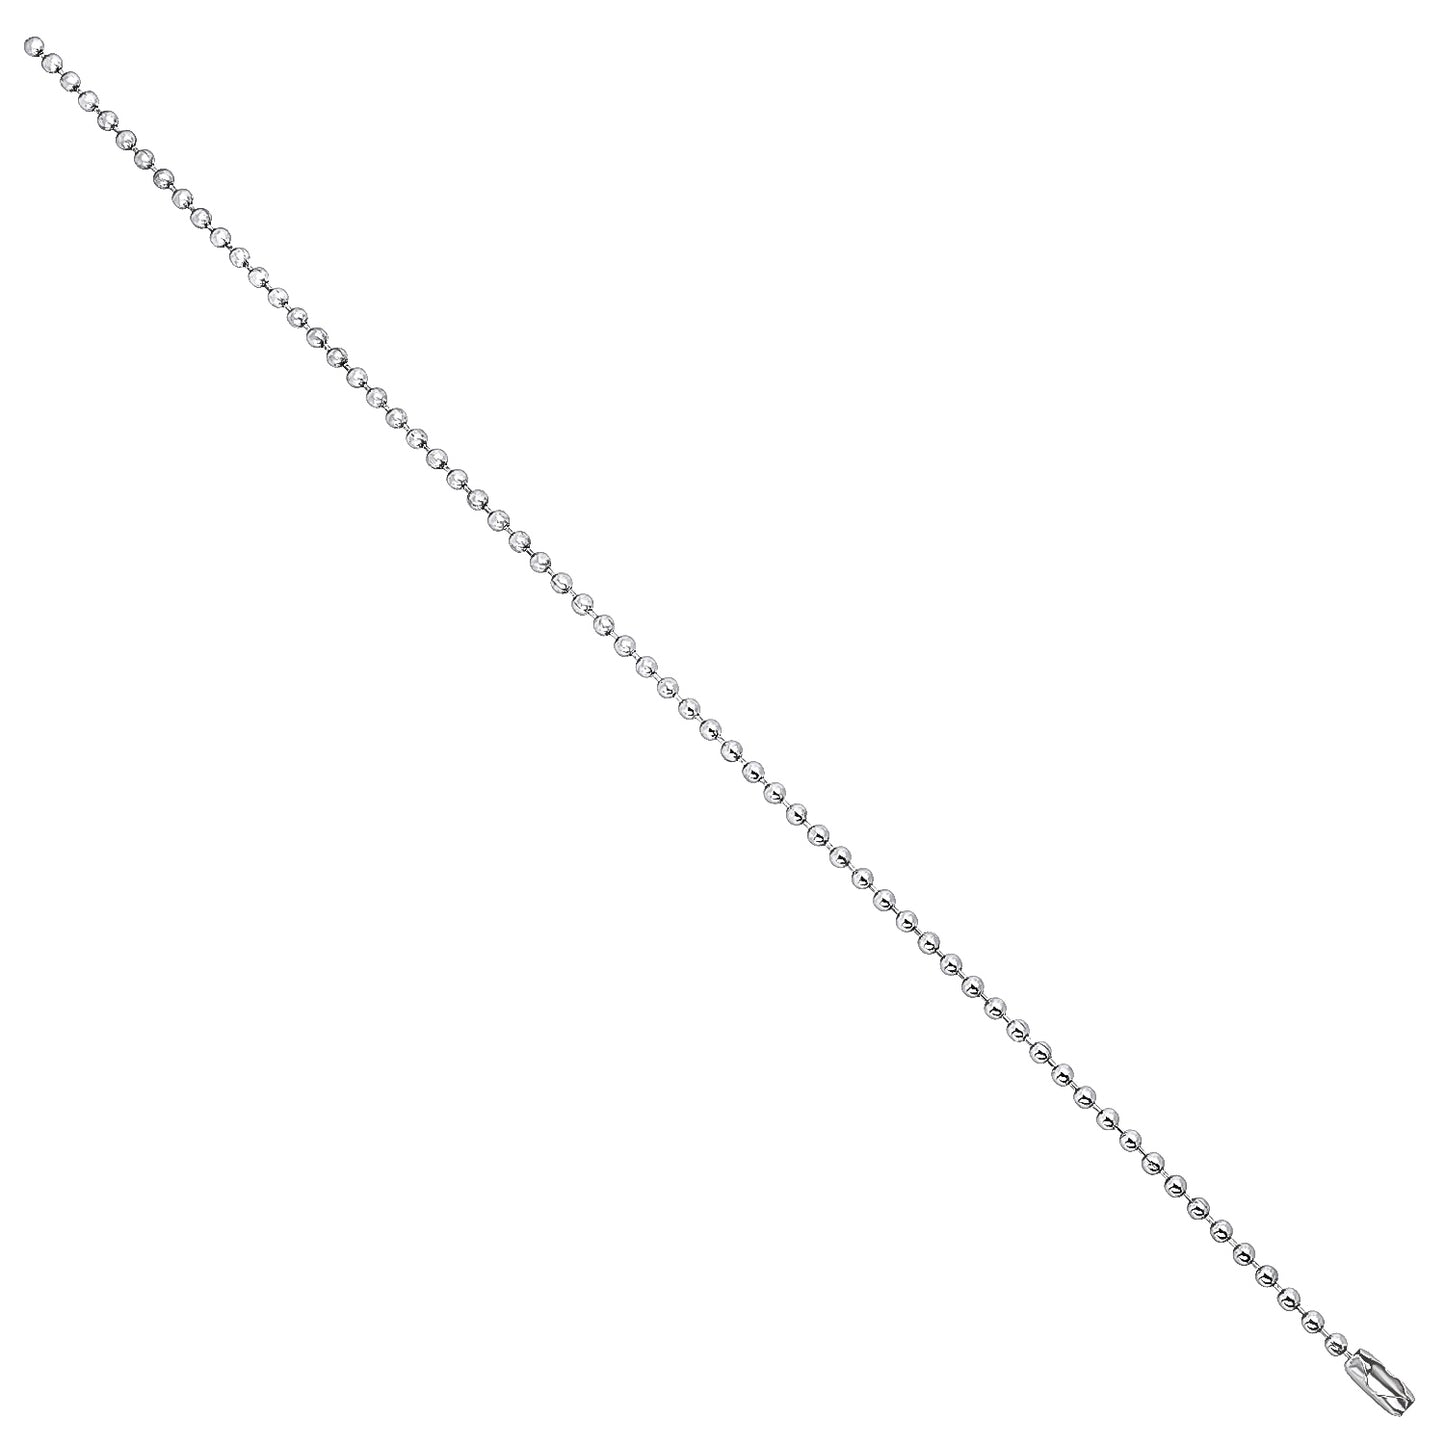 2.3mm High-Polished 0.25 mils (6 microns) Rhodium Brass Round Bead Chain Necklace, 7'-36' + Jewelry Cloth & Pouch (SKU: RL-069B)